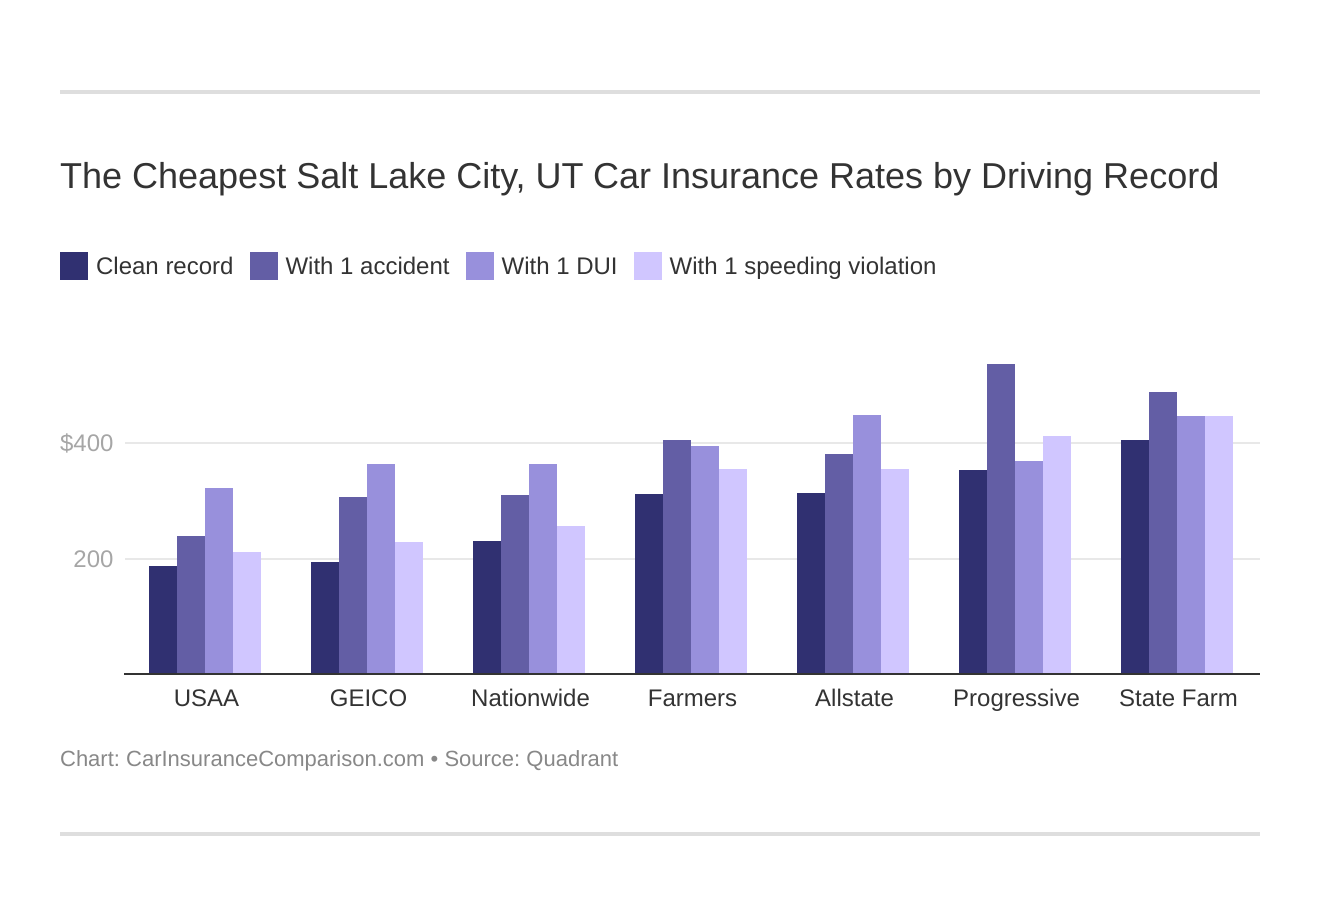 The Cheapest Salt Lake City, UT Car Insurance Rates by Driving Record